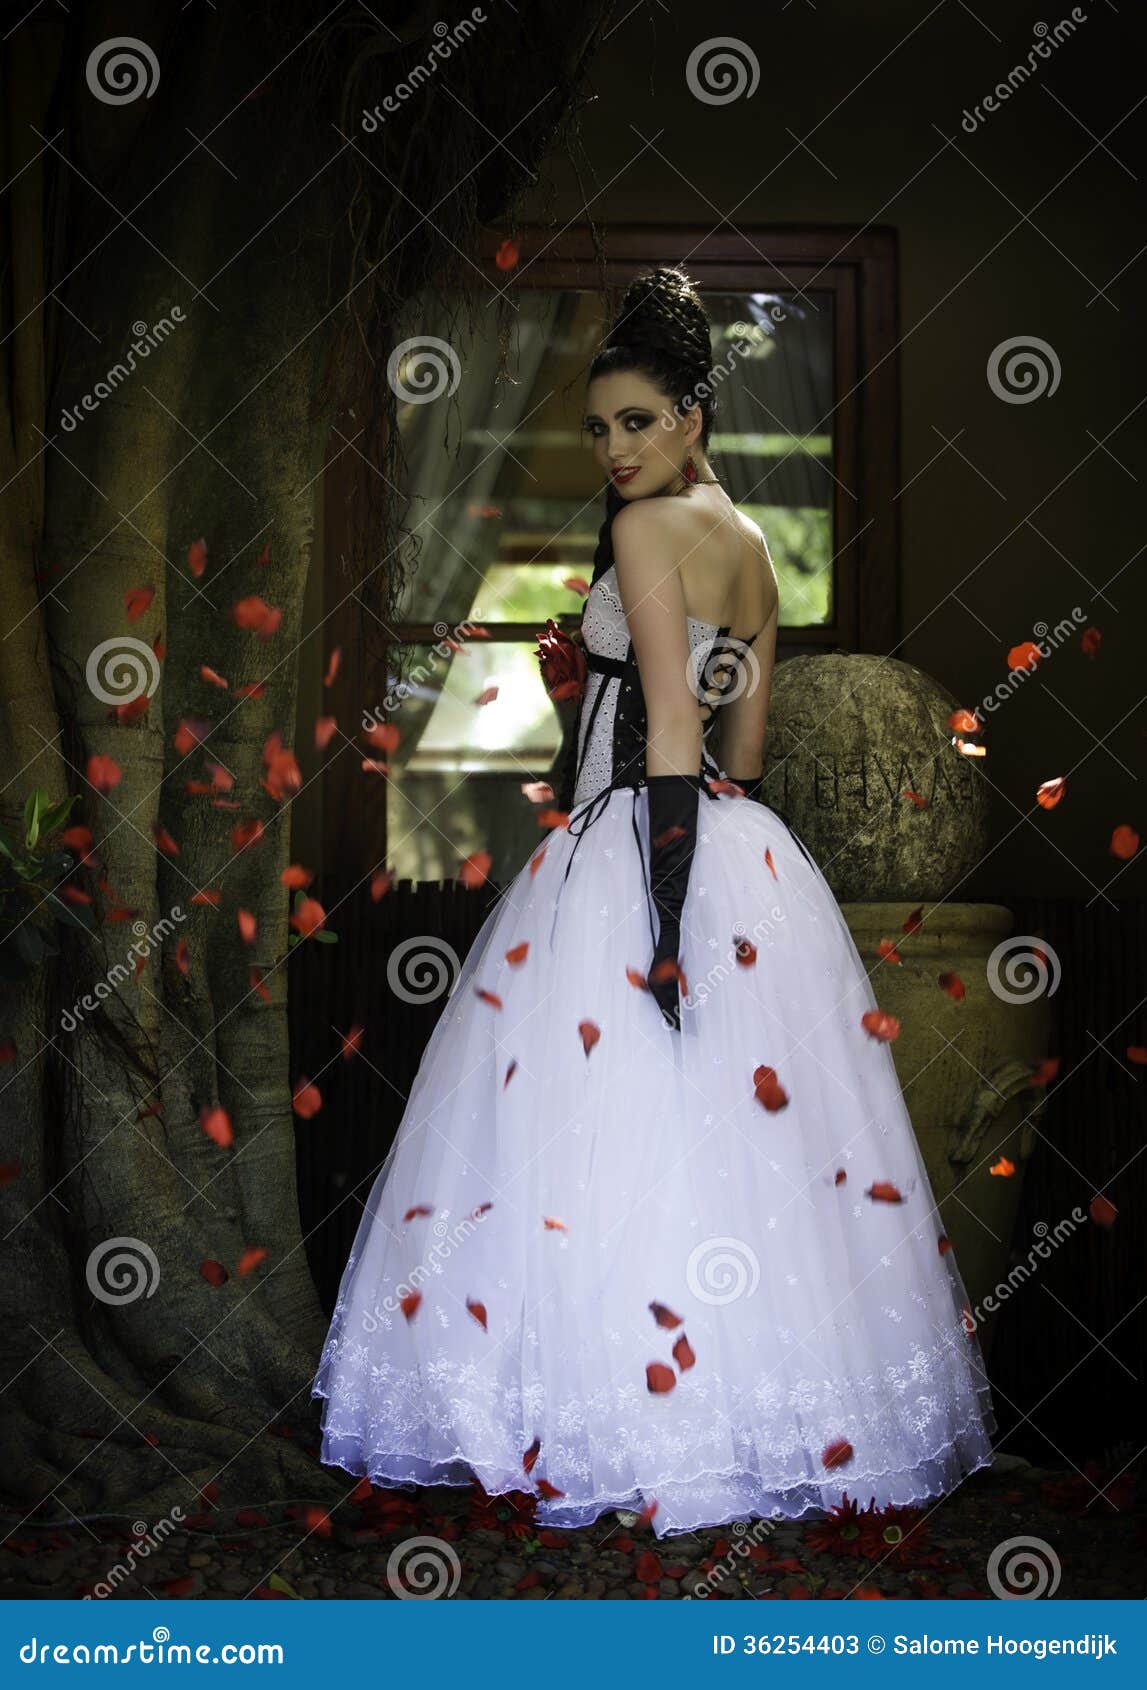 Fantasy Bride Surrounded by Red Rose Petals Stock Image - Image of clothes,  embroidery: 36254403